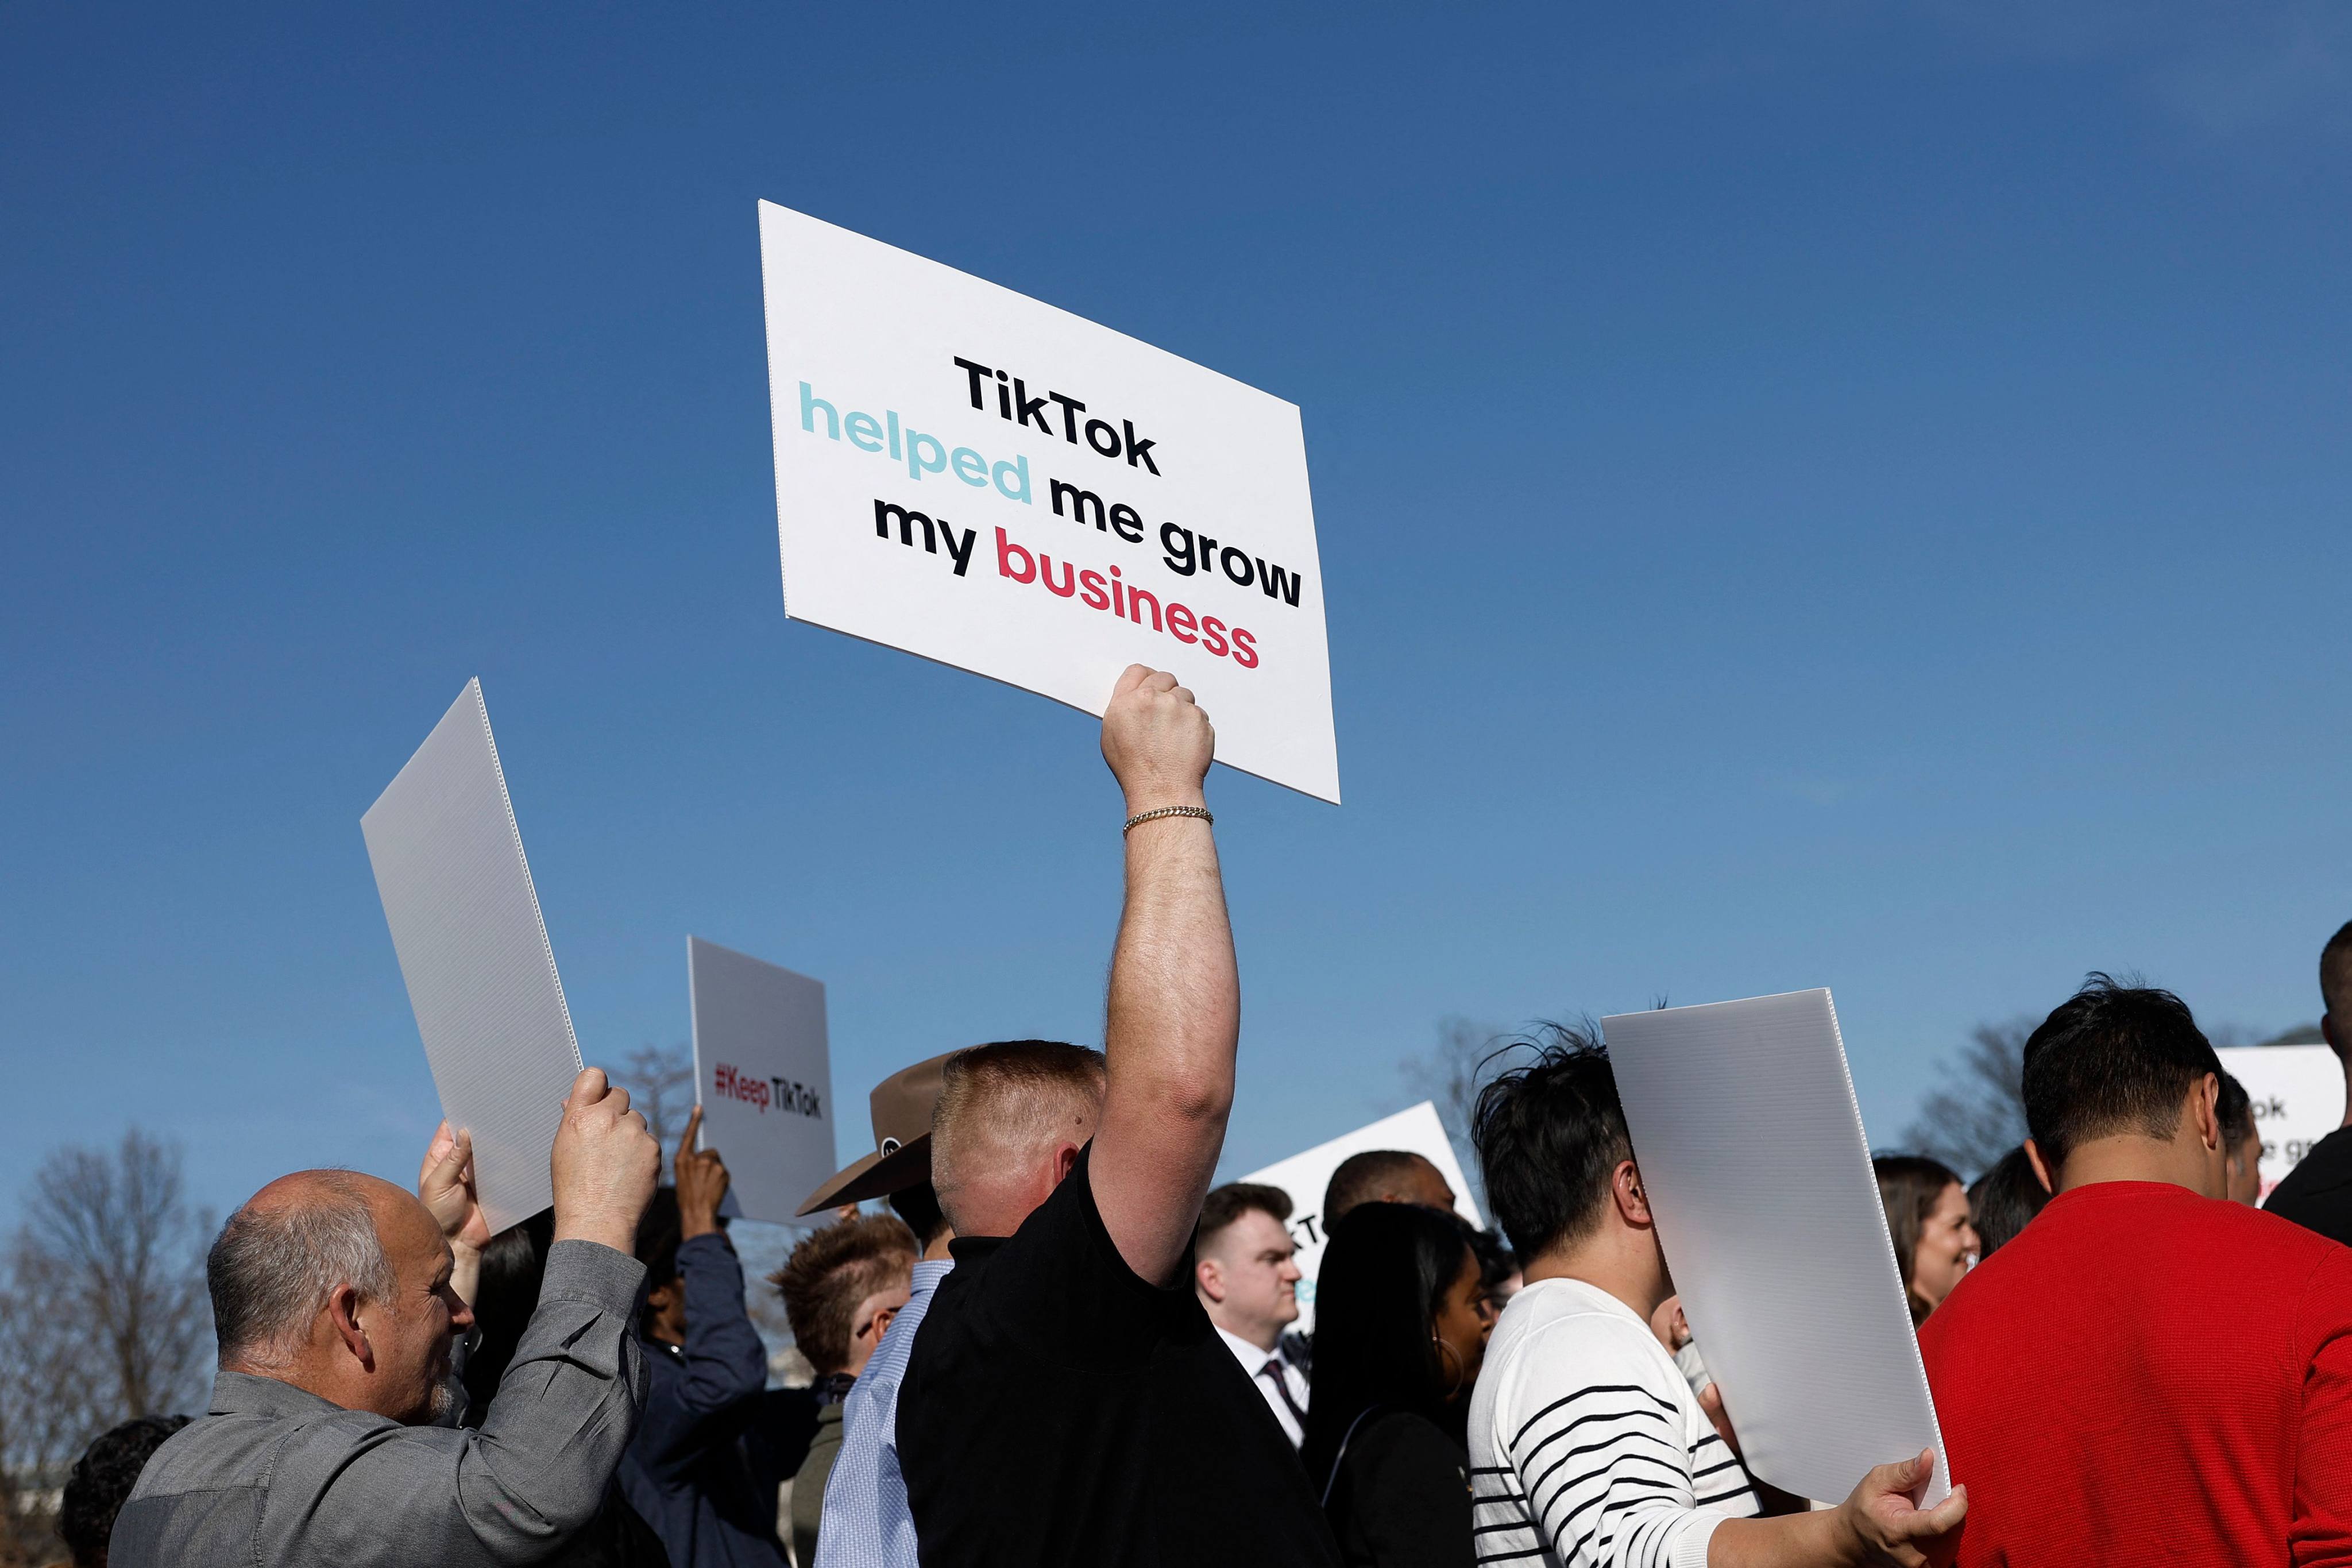 People hold up signs in support of TikTok at a news conference outside the US Capitol building in Washington on March 12. Photo: Getty Images/AFP